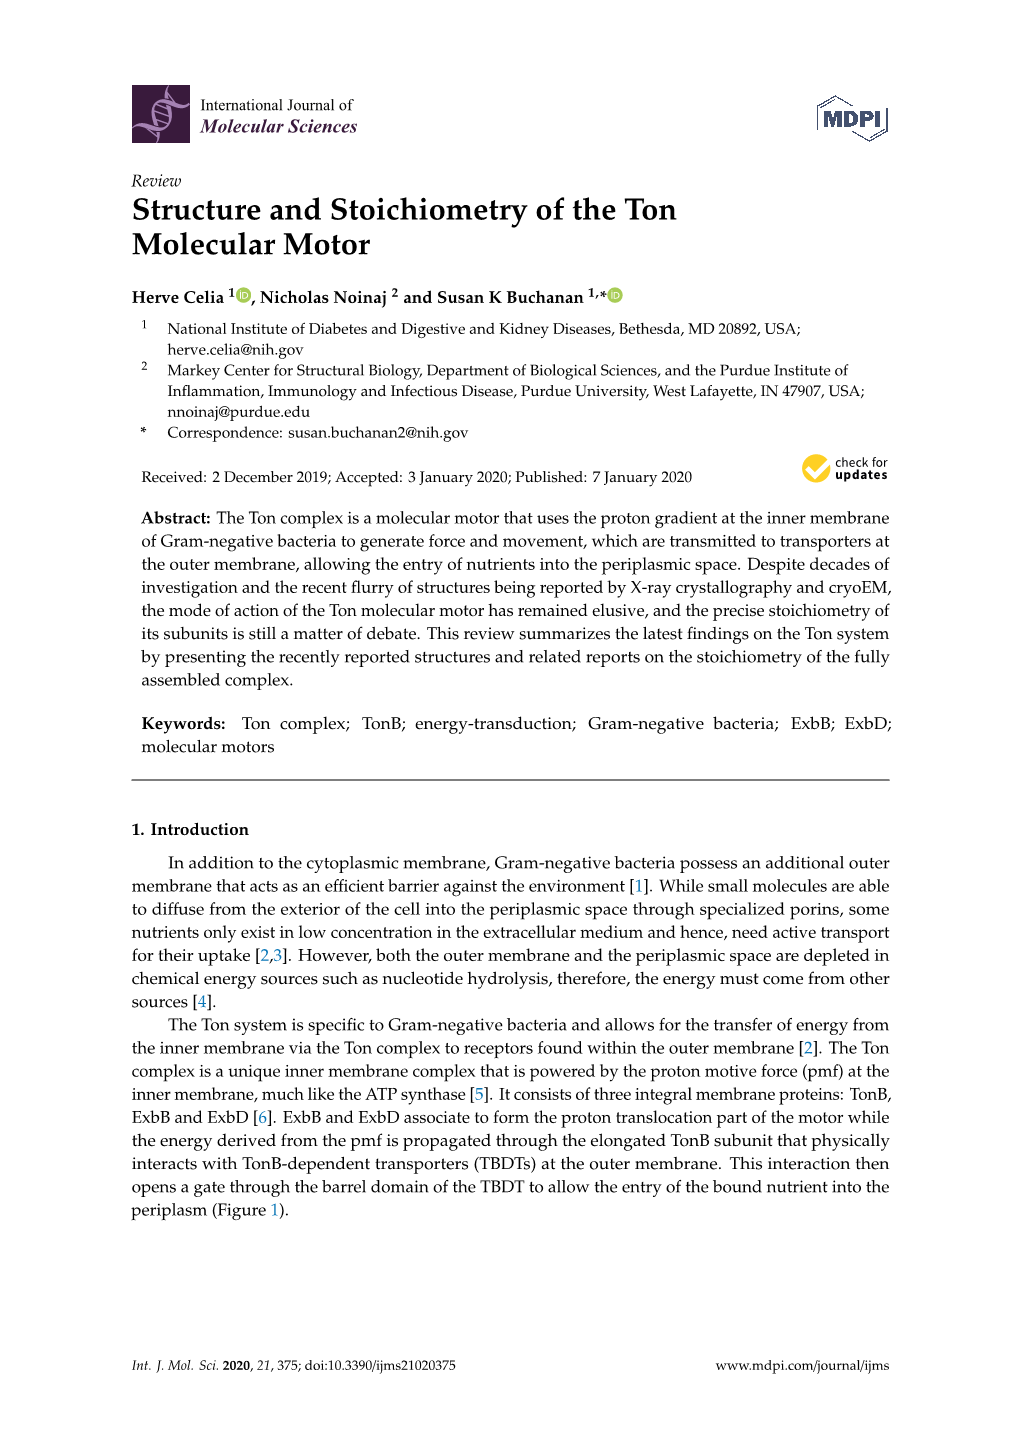 Structure and Stoichiometry of the Ton Molecular Motor